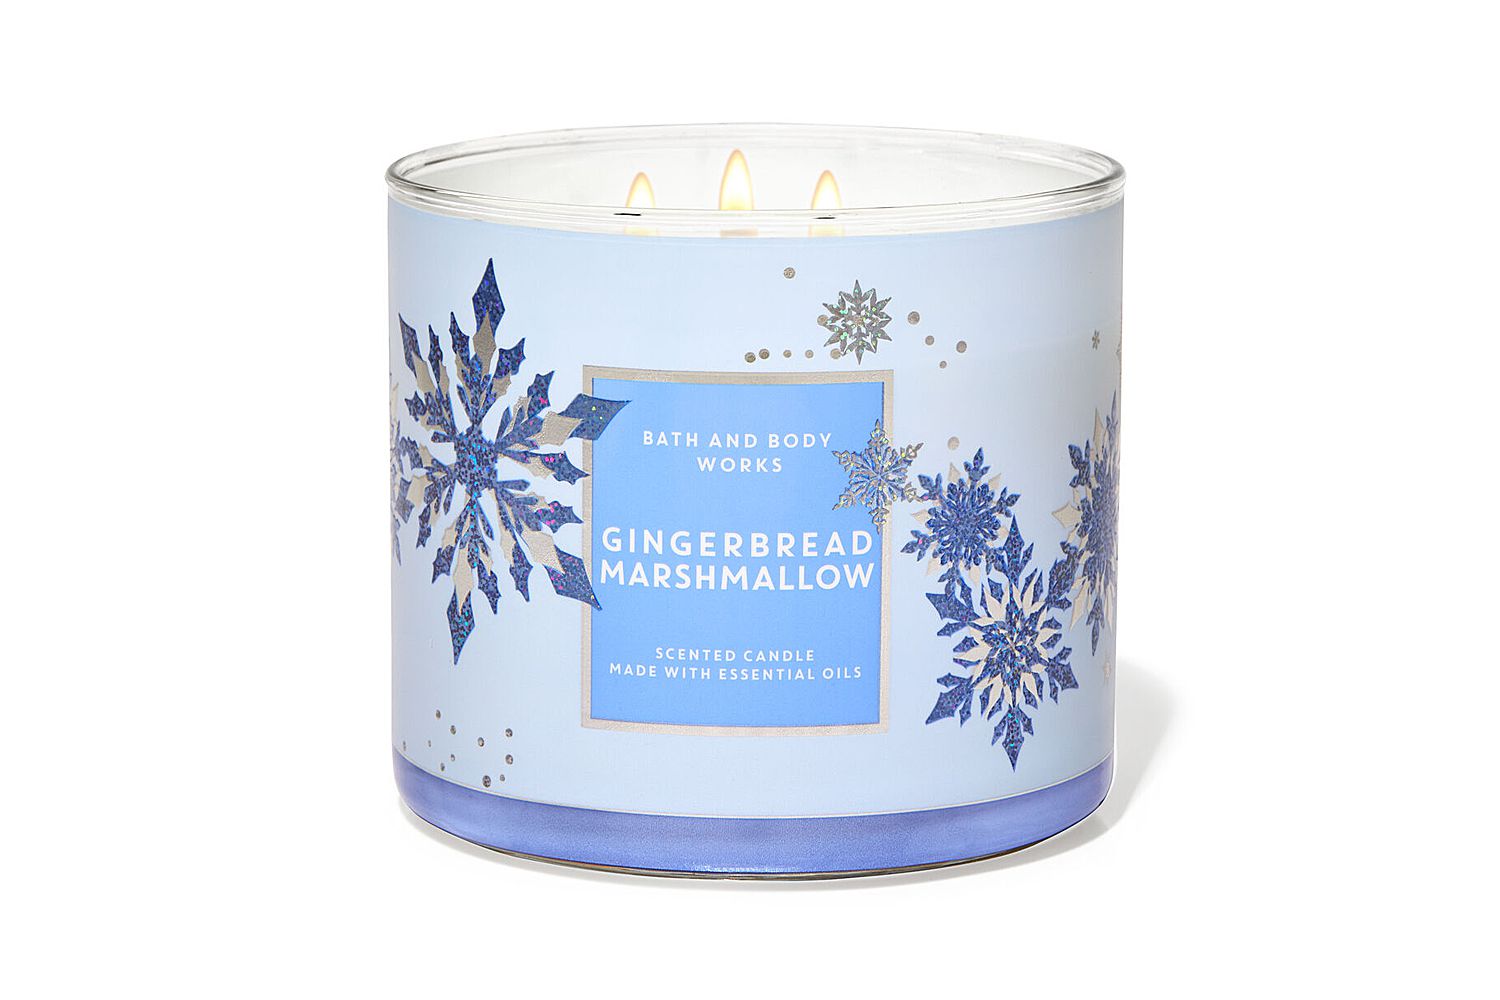 Bath and Body Works' Gingerbread Marshmallow